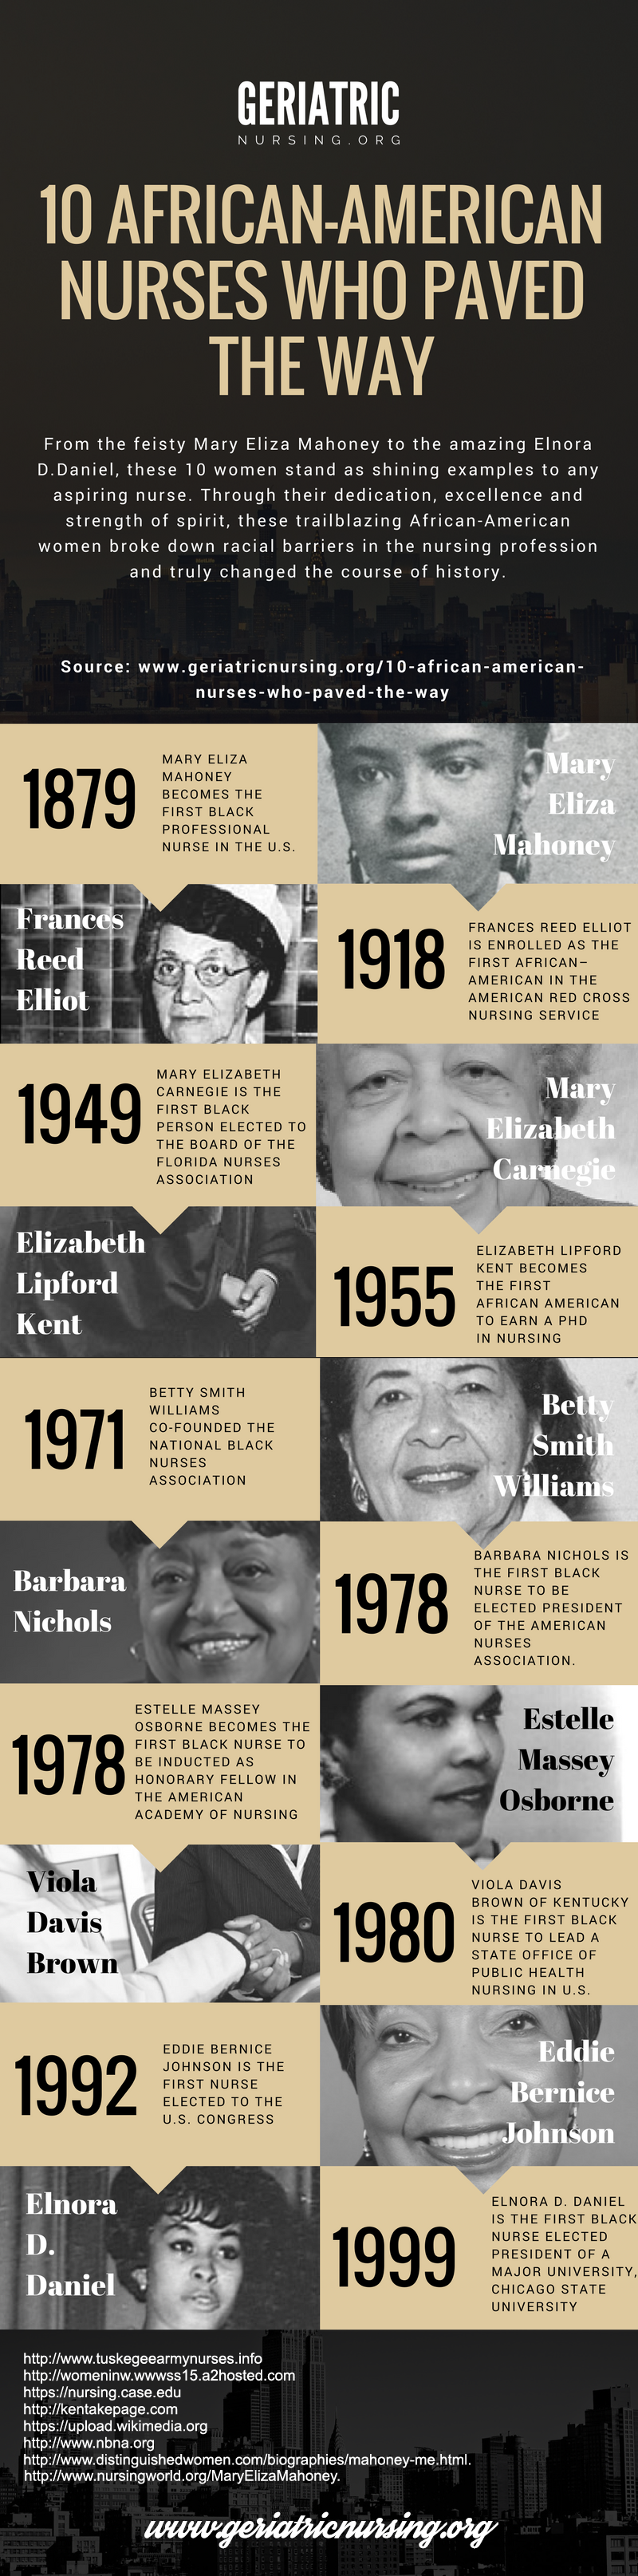 10 African American Nurses Who Paved the Way Infographic